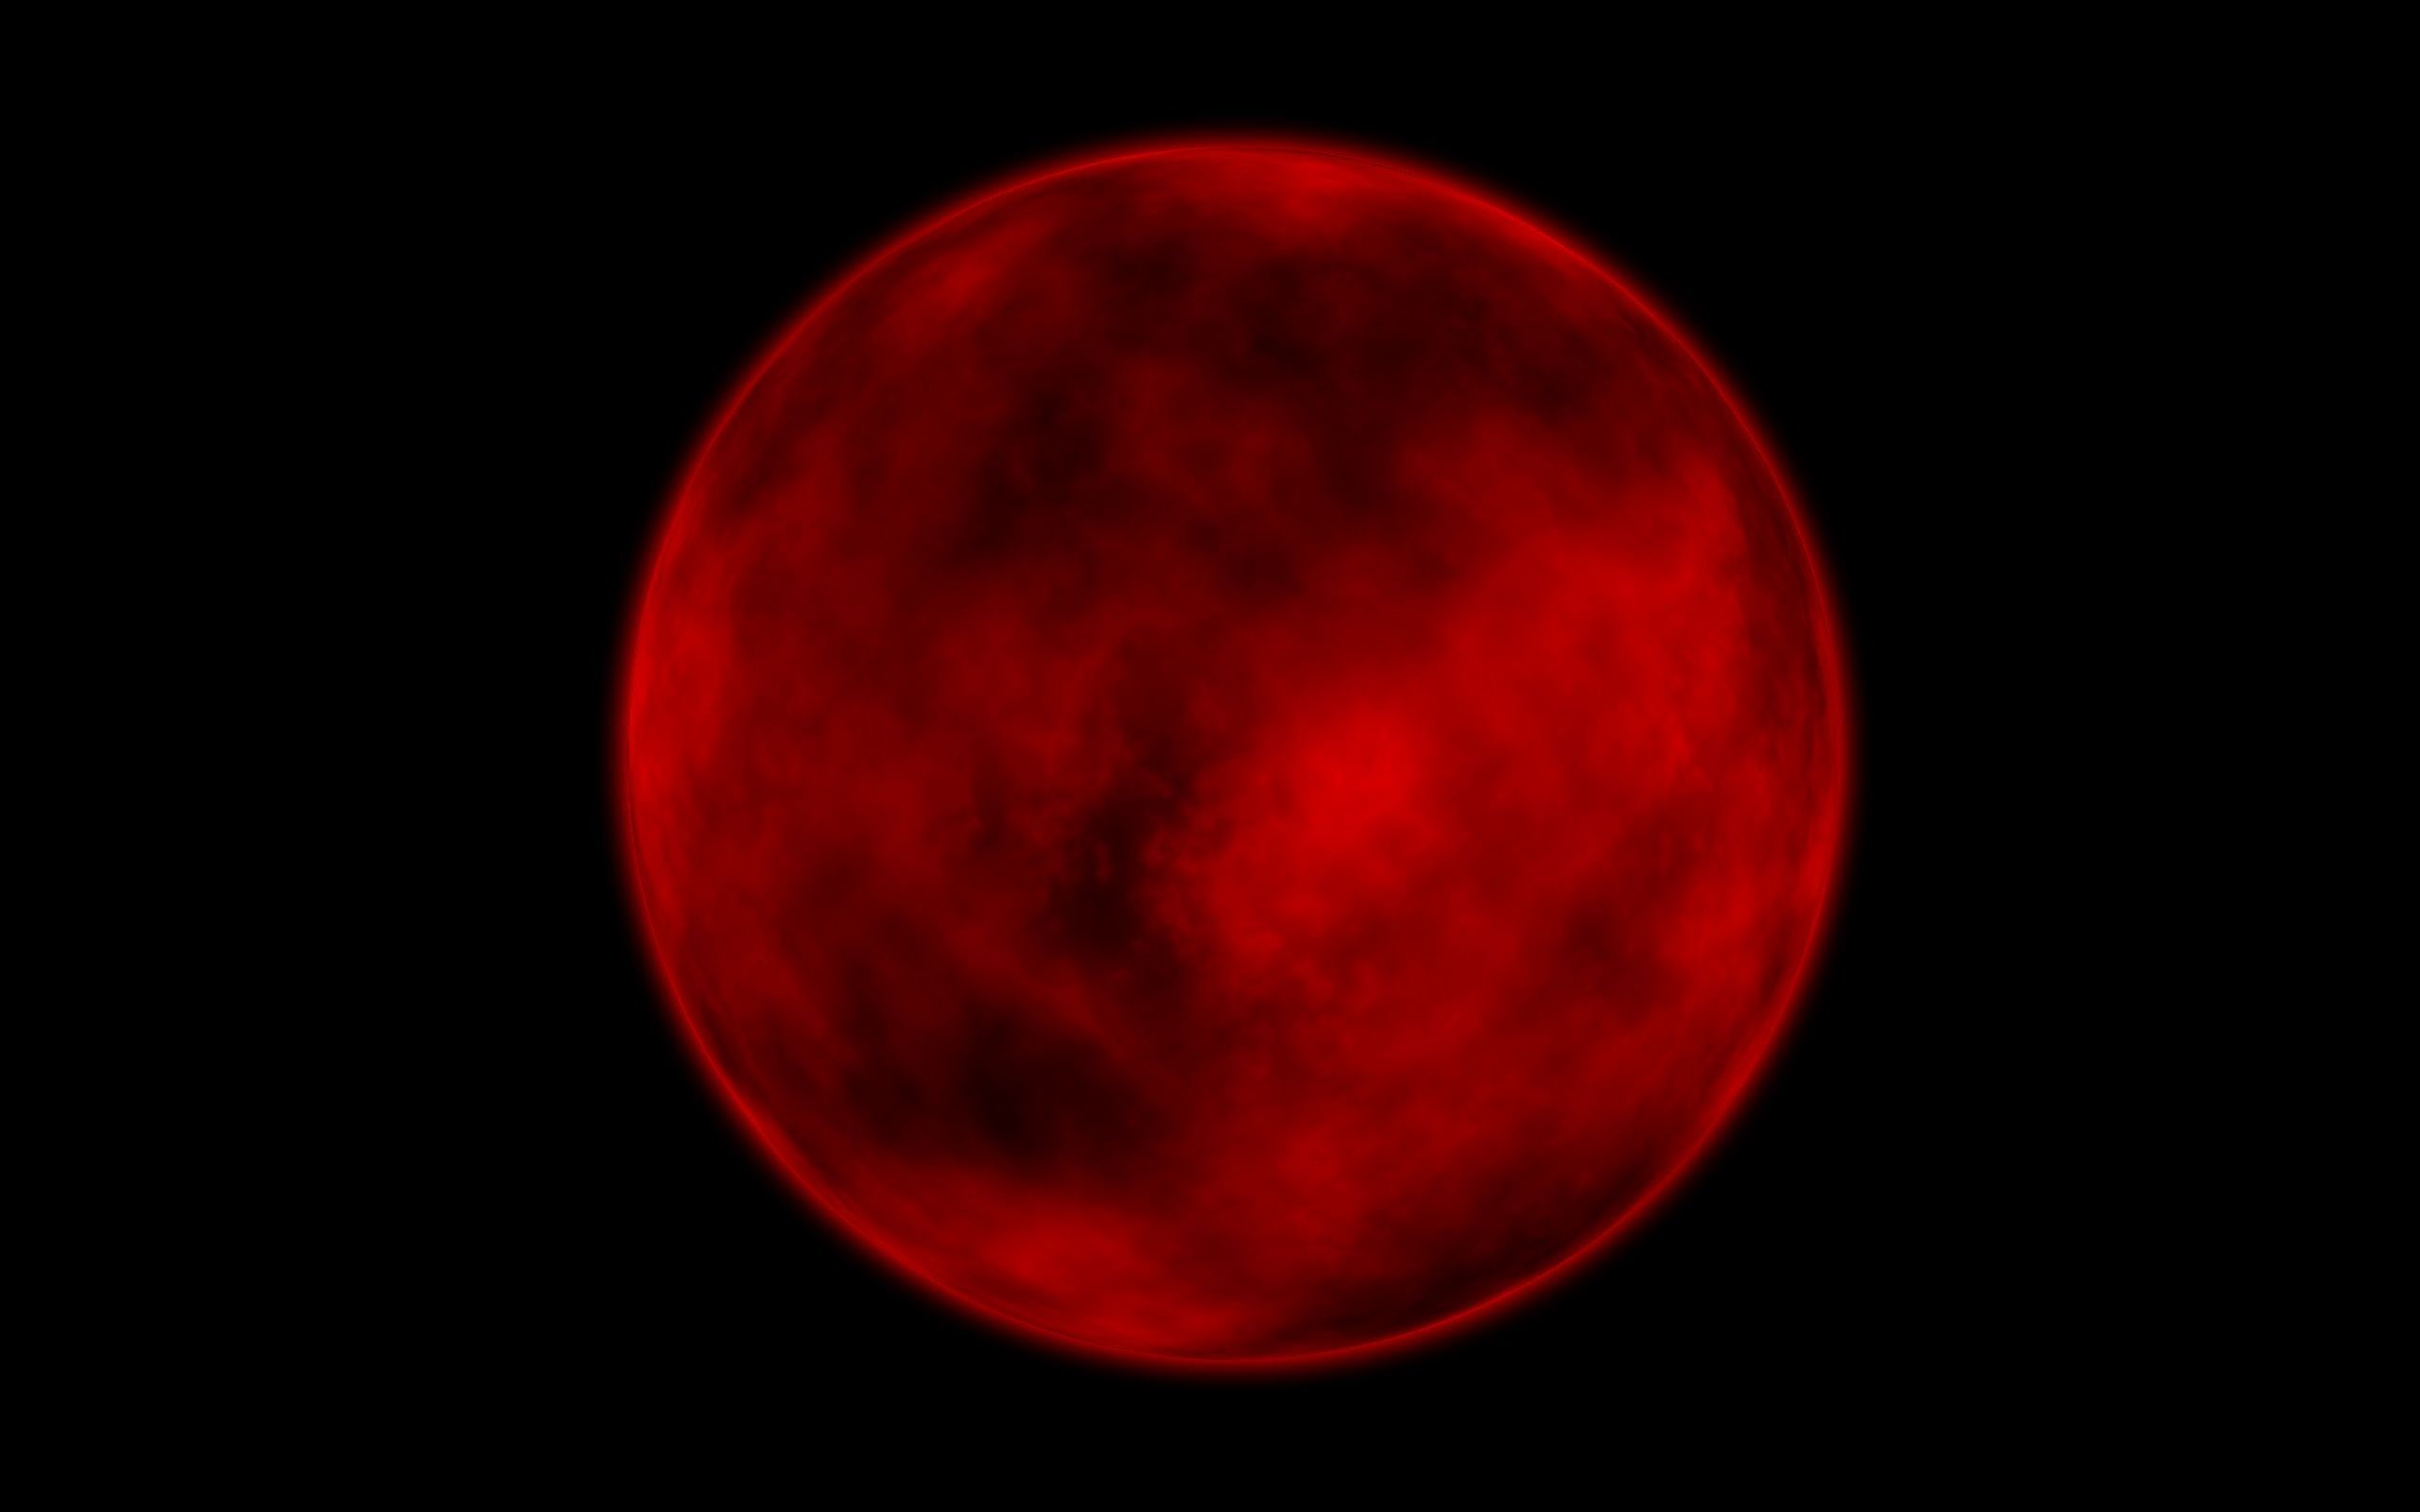 2560x1600 Blood Red Moon Wallpaper | HD Wallpapers | Blood red moon, Red moon Ð¸ Moon  images